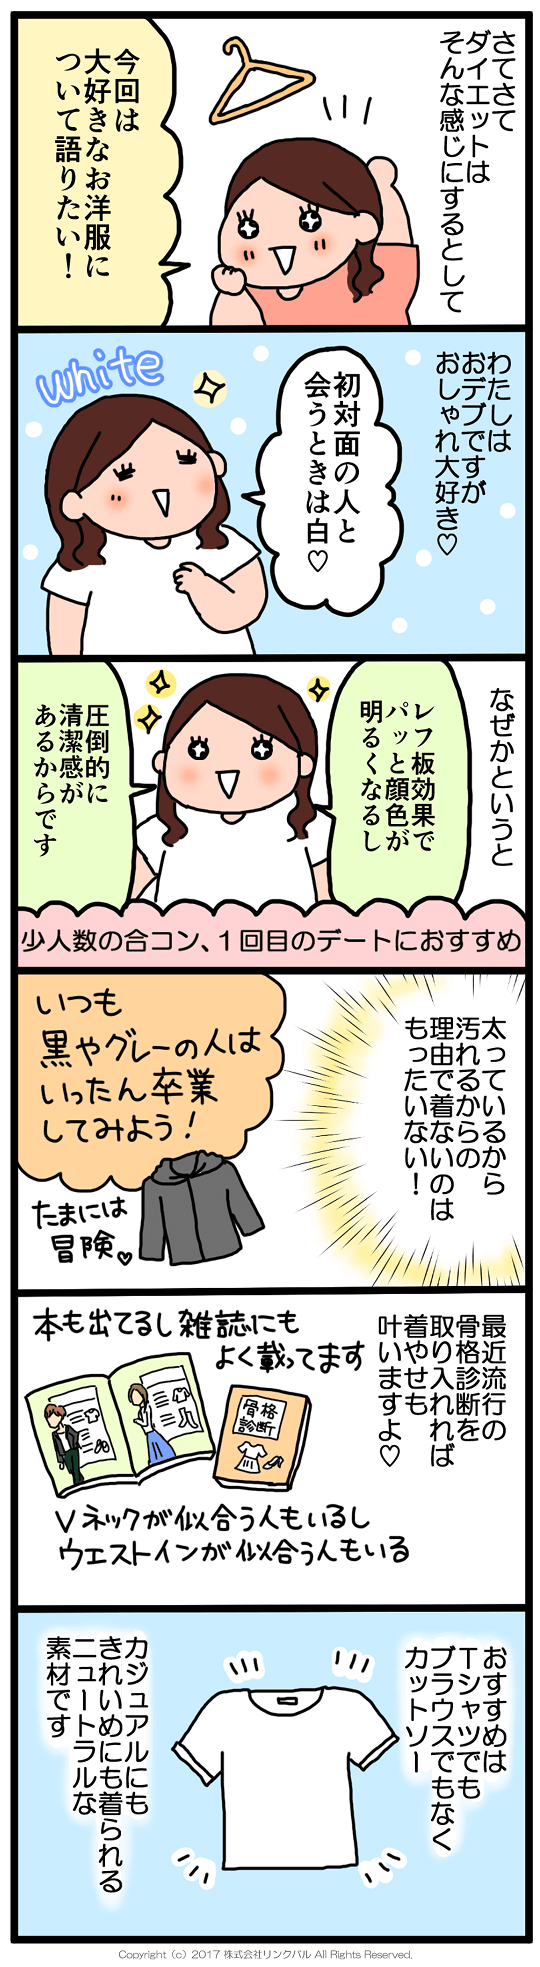 https://machicon.jp/ivery/wp-content/uploads/2017/08/4L09.png